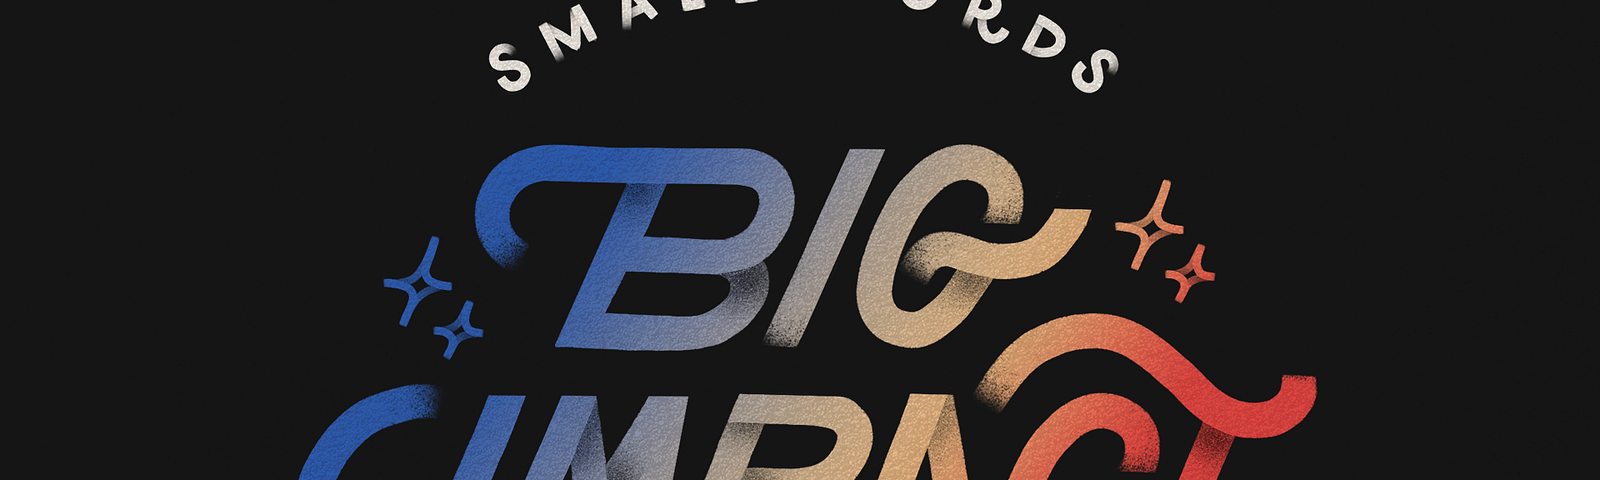 Hand lettering design saying ‘Small words big impact’